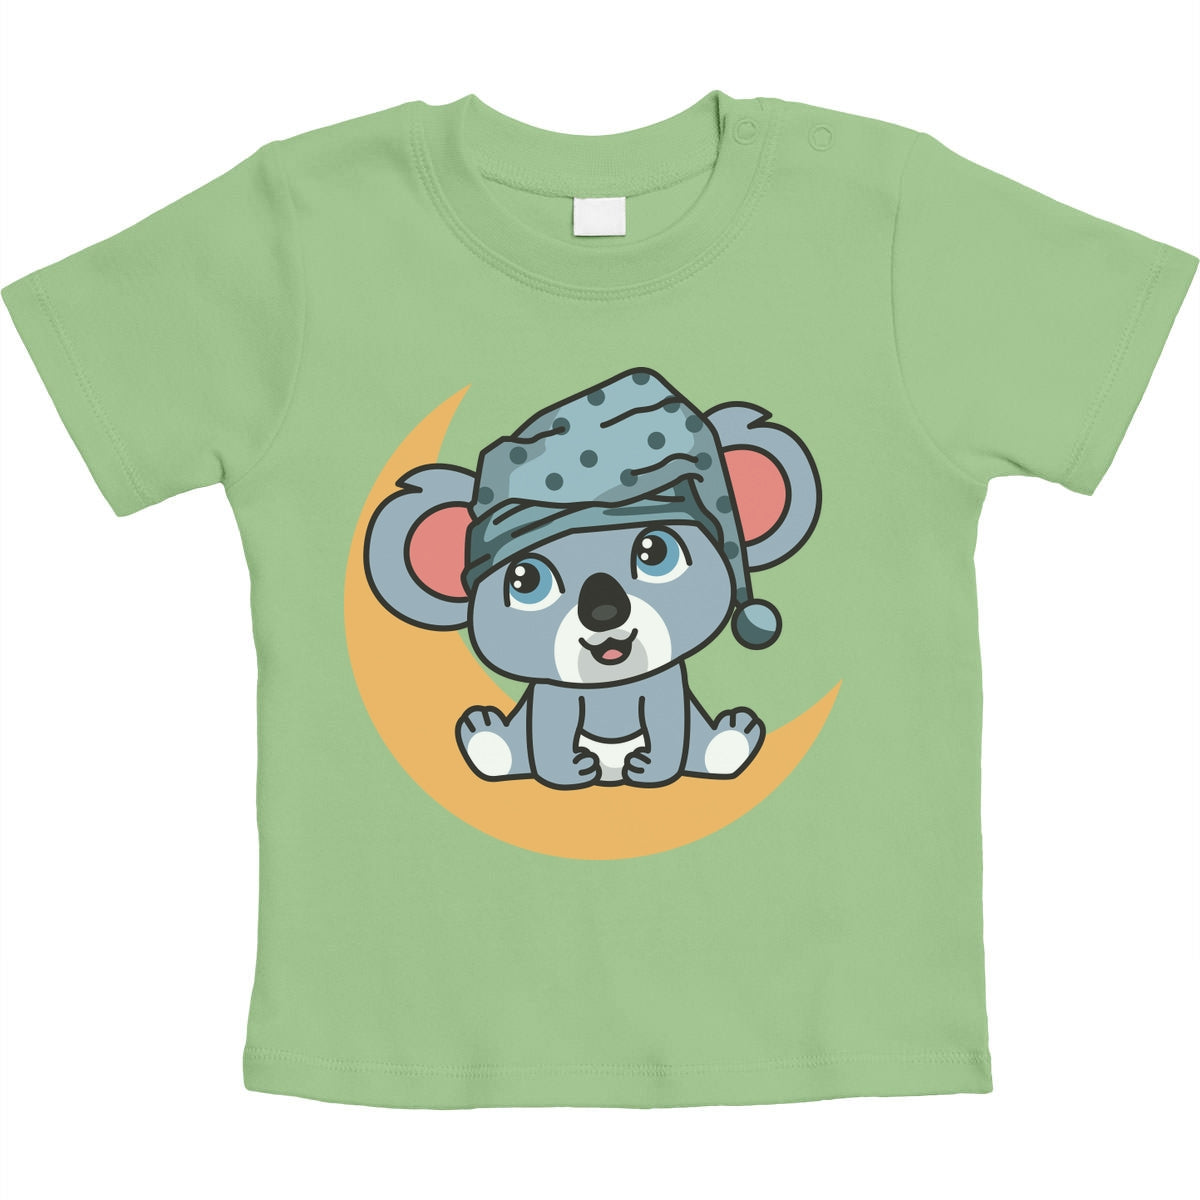 Moon Koala Baby Tiere Kleidung Babykleidung Outfit Unisex Baby T-Shirt Gr. 66-93